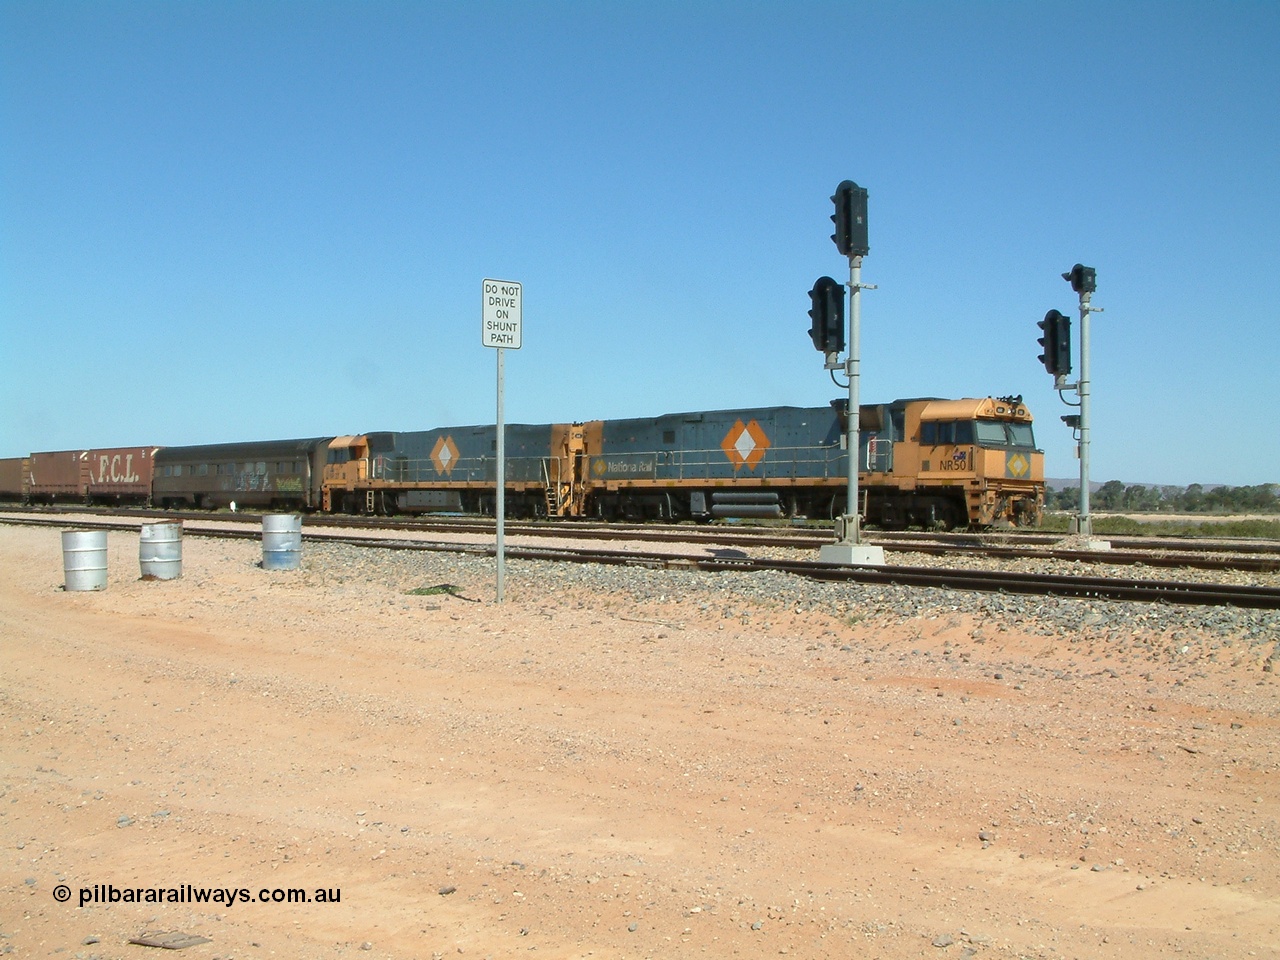 030404 125017
Port Augusta Spencer Junction yard, a Perth bound intermodal awaits departure time on 13 Road behind National Rail NR class units built by Goninan as GE Cv40-9i models, NR 50 serial 7250-08 / 97-252 and NR 37 serial 7250-06 / 97-239. 4th April 2003.
Keywords: NR-class;NR50;Goninan;GE;Cv40-9i;7250-08/97-252;